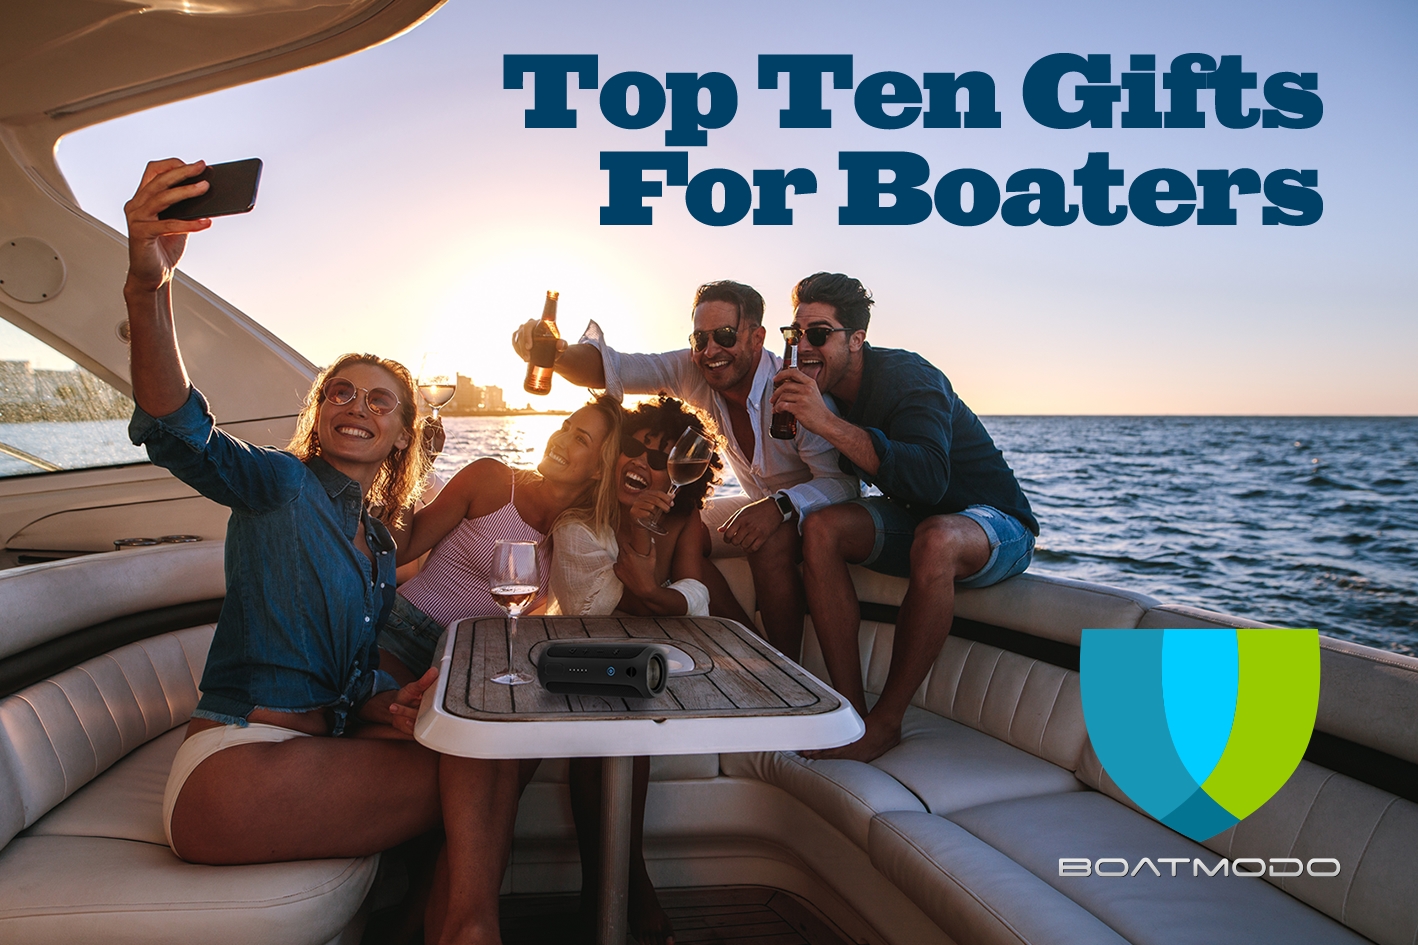 Top 10 Gifts For Boaters 2019 - Boatmodo